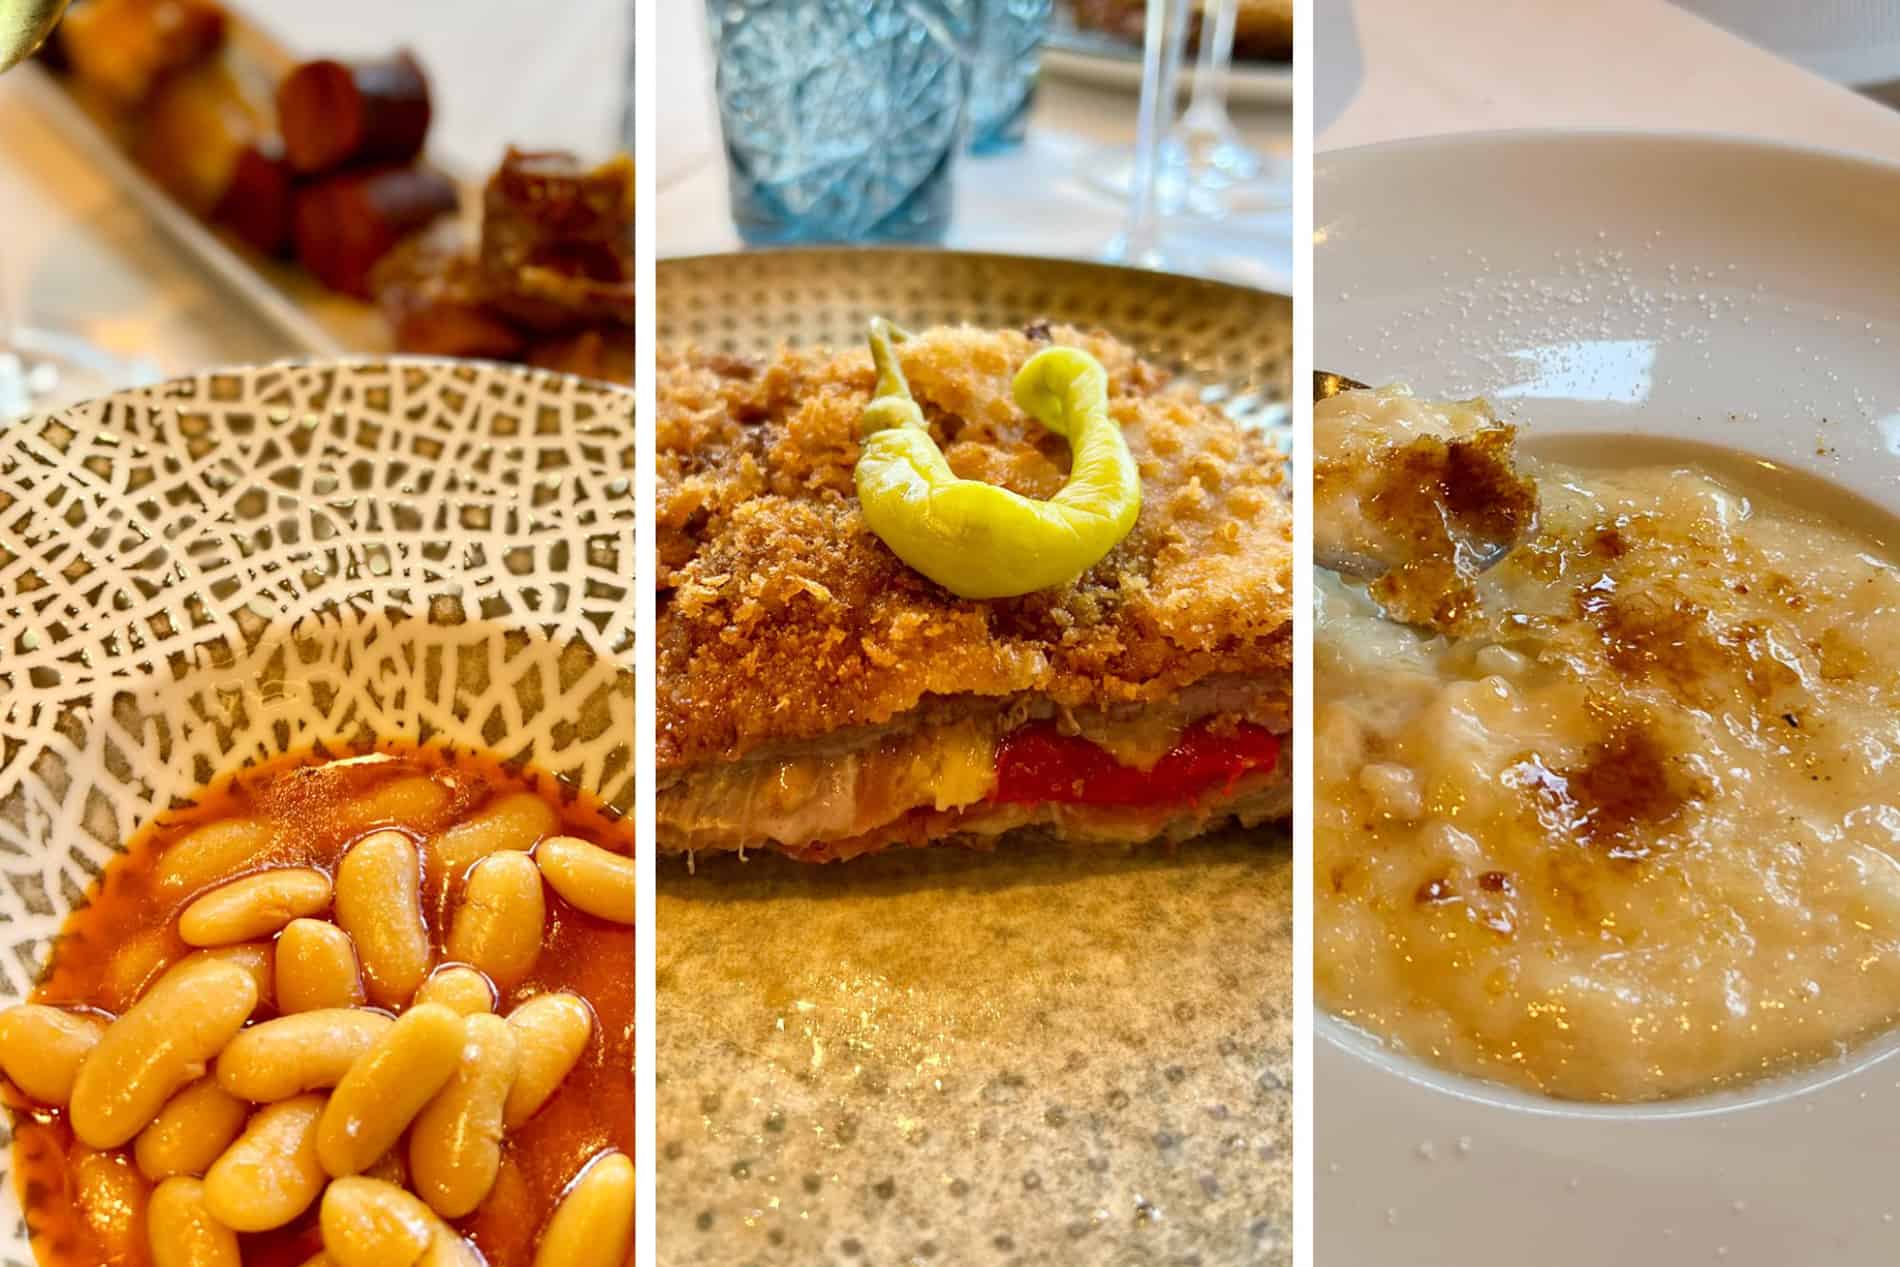 Asturian dishes (left to right): Fabada Asturiana (fava bean and pork stew), Cachopo (layered veal, cheese, and ham in breadcrumbs), and Arroz con Leche (creamy rice pudding).